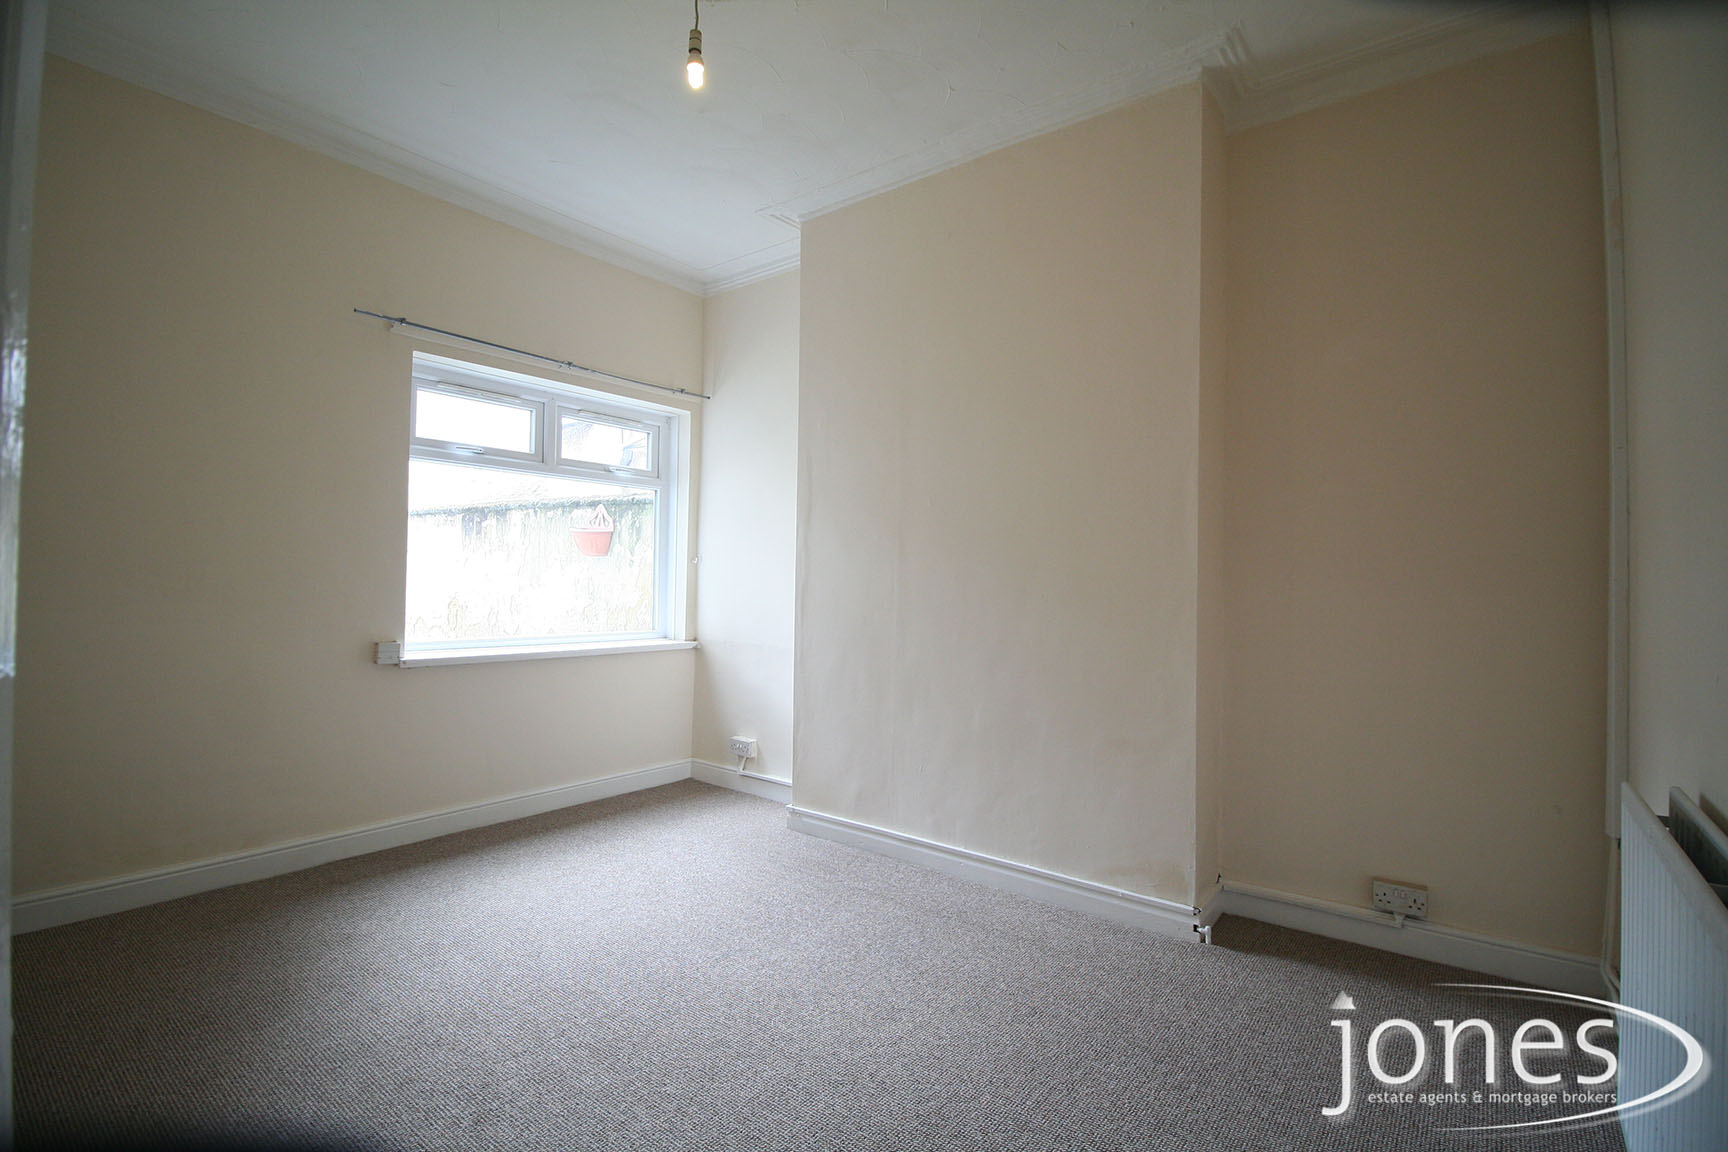 Home for Sale Let - Photo 03 Victoria Road,  Thornaby, Stockton on Tees TS17 6HH